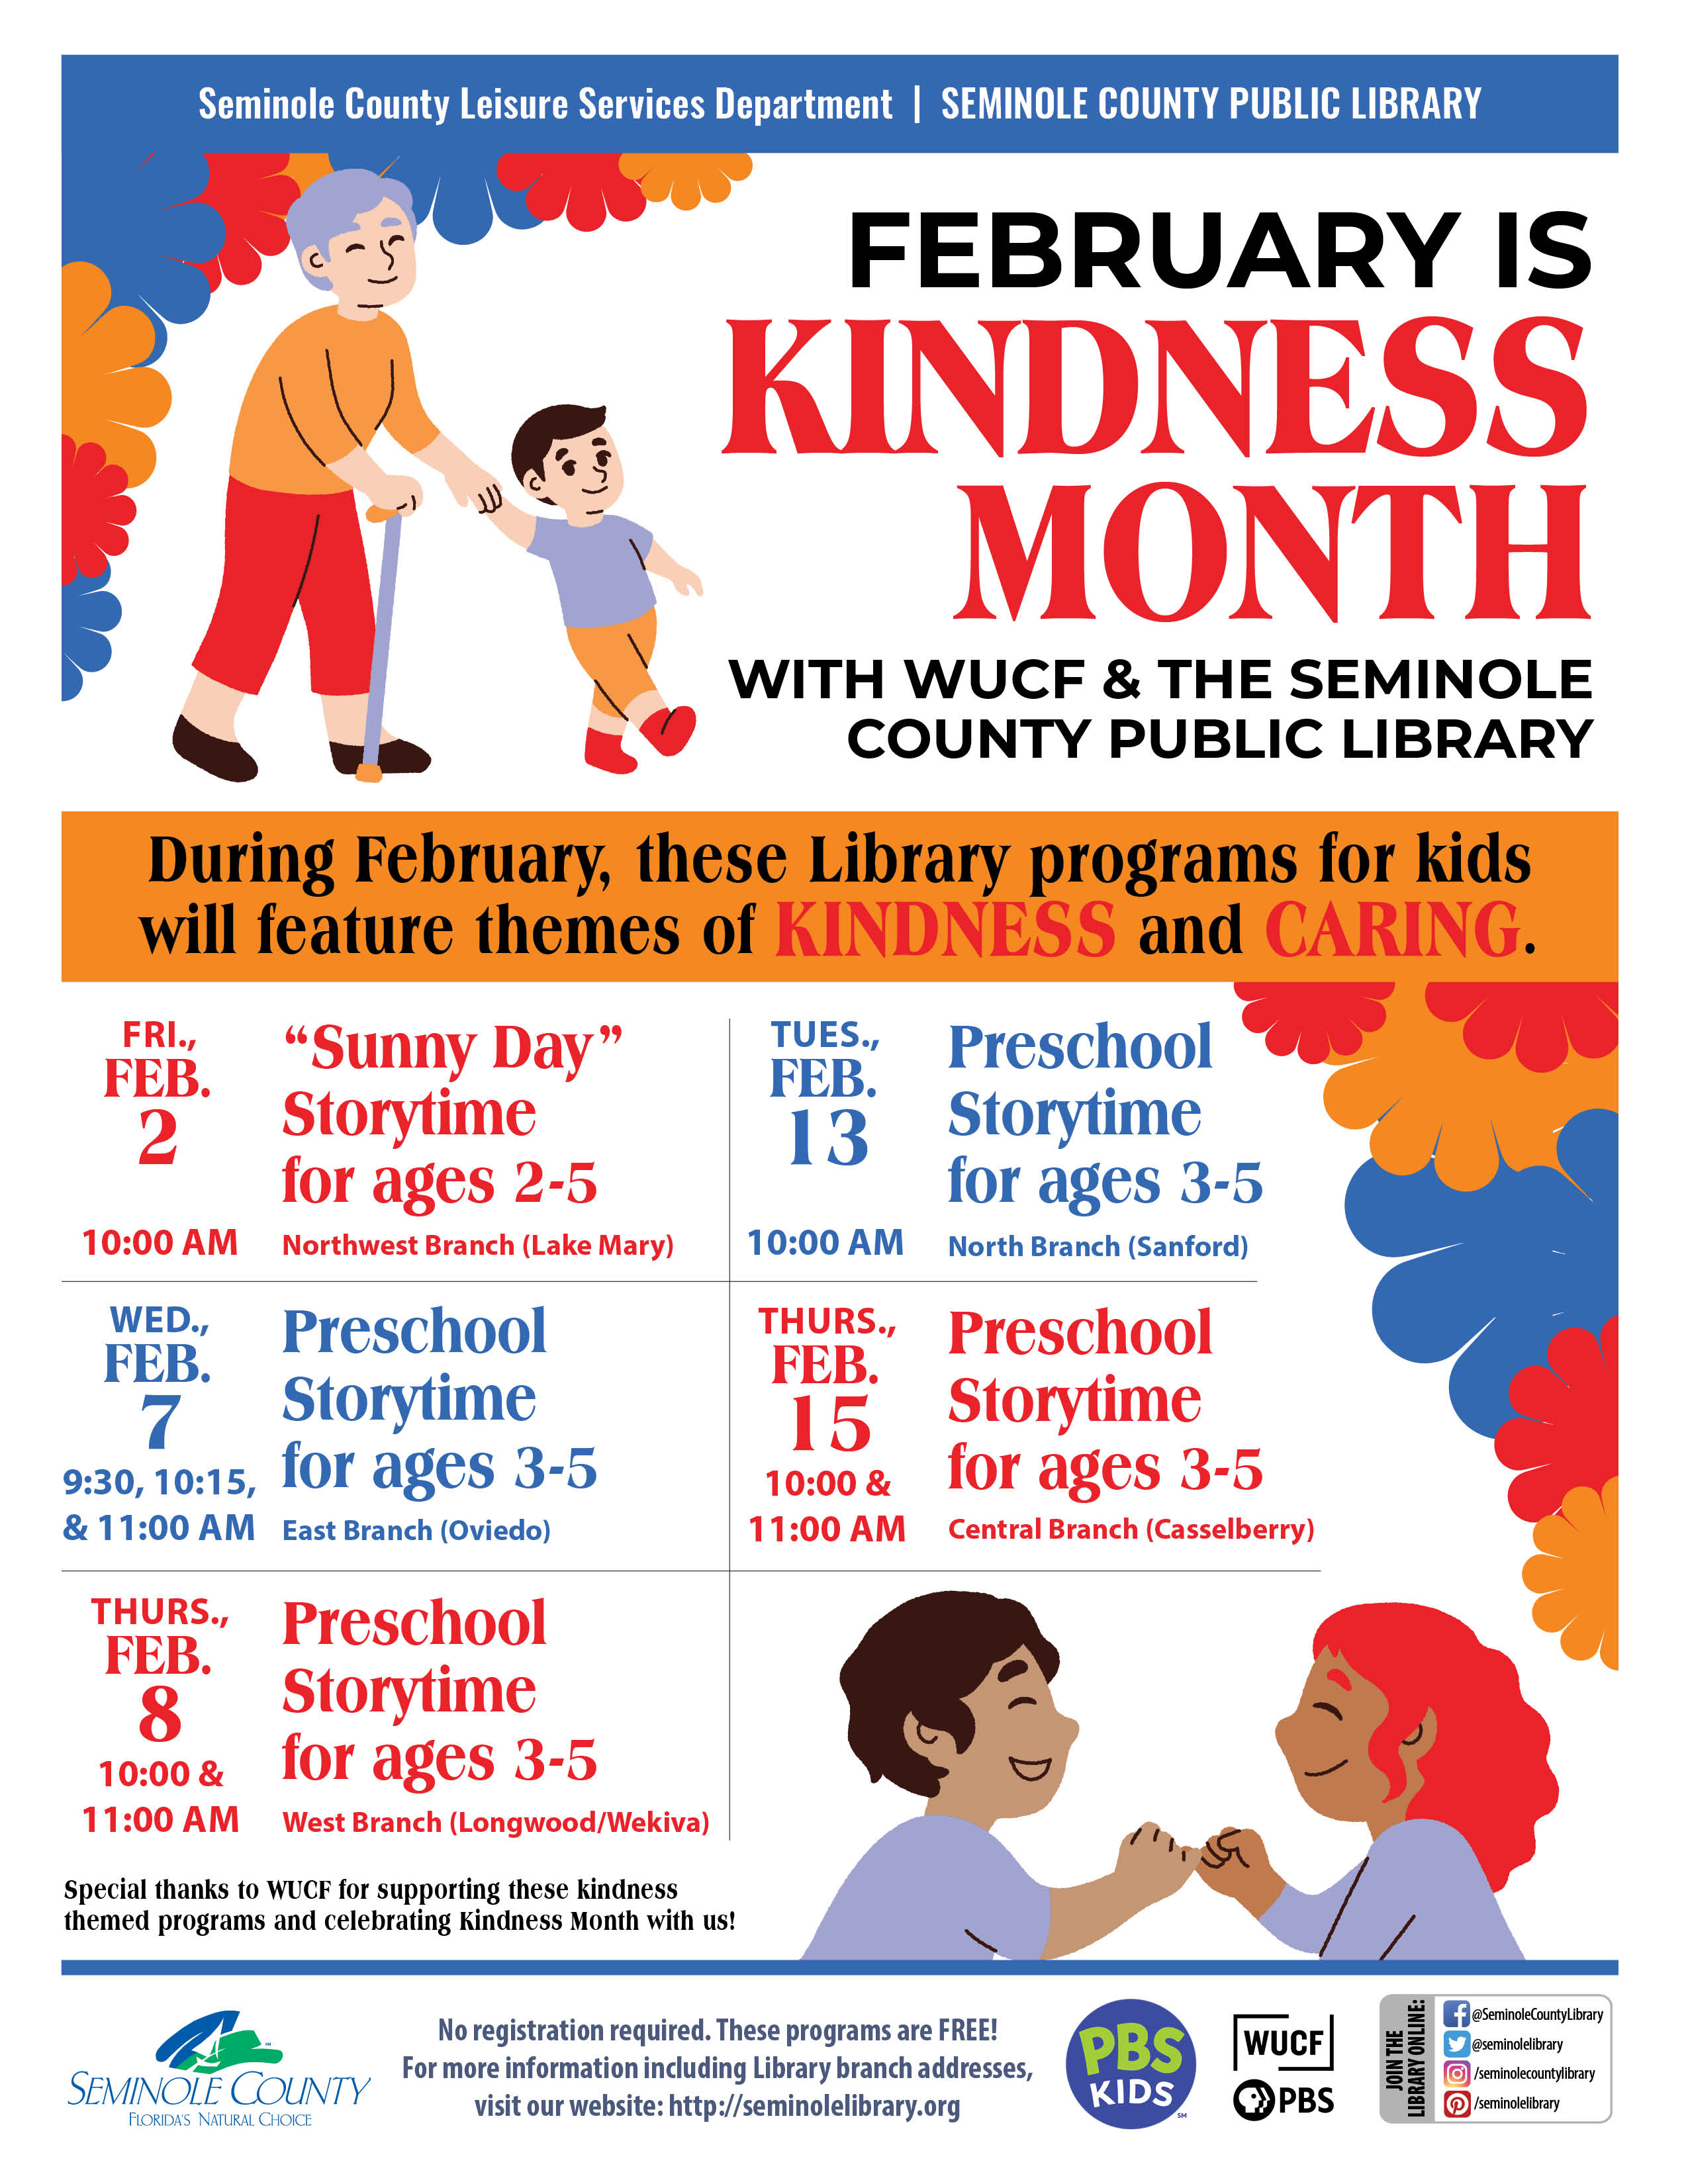 Kindness Month at the Seminole County Library